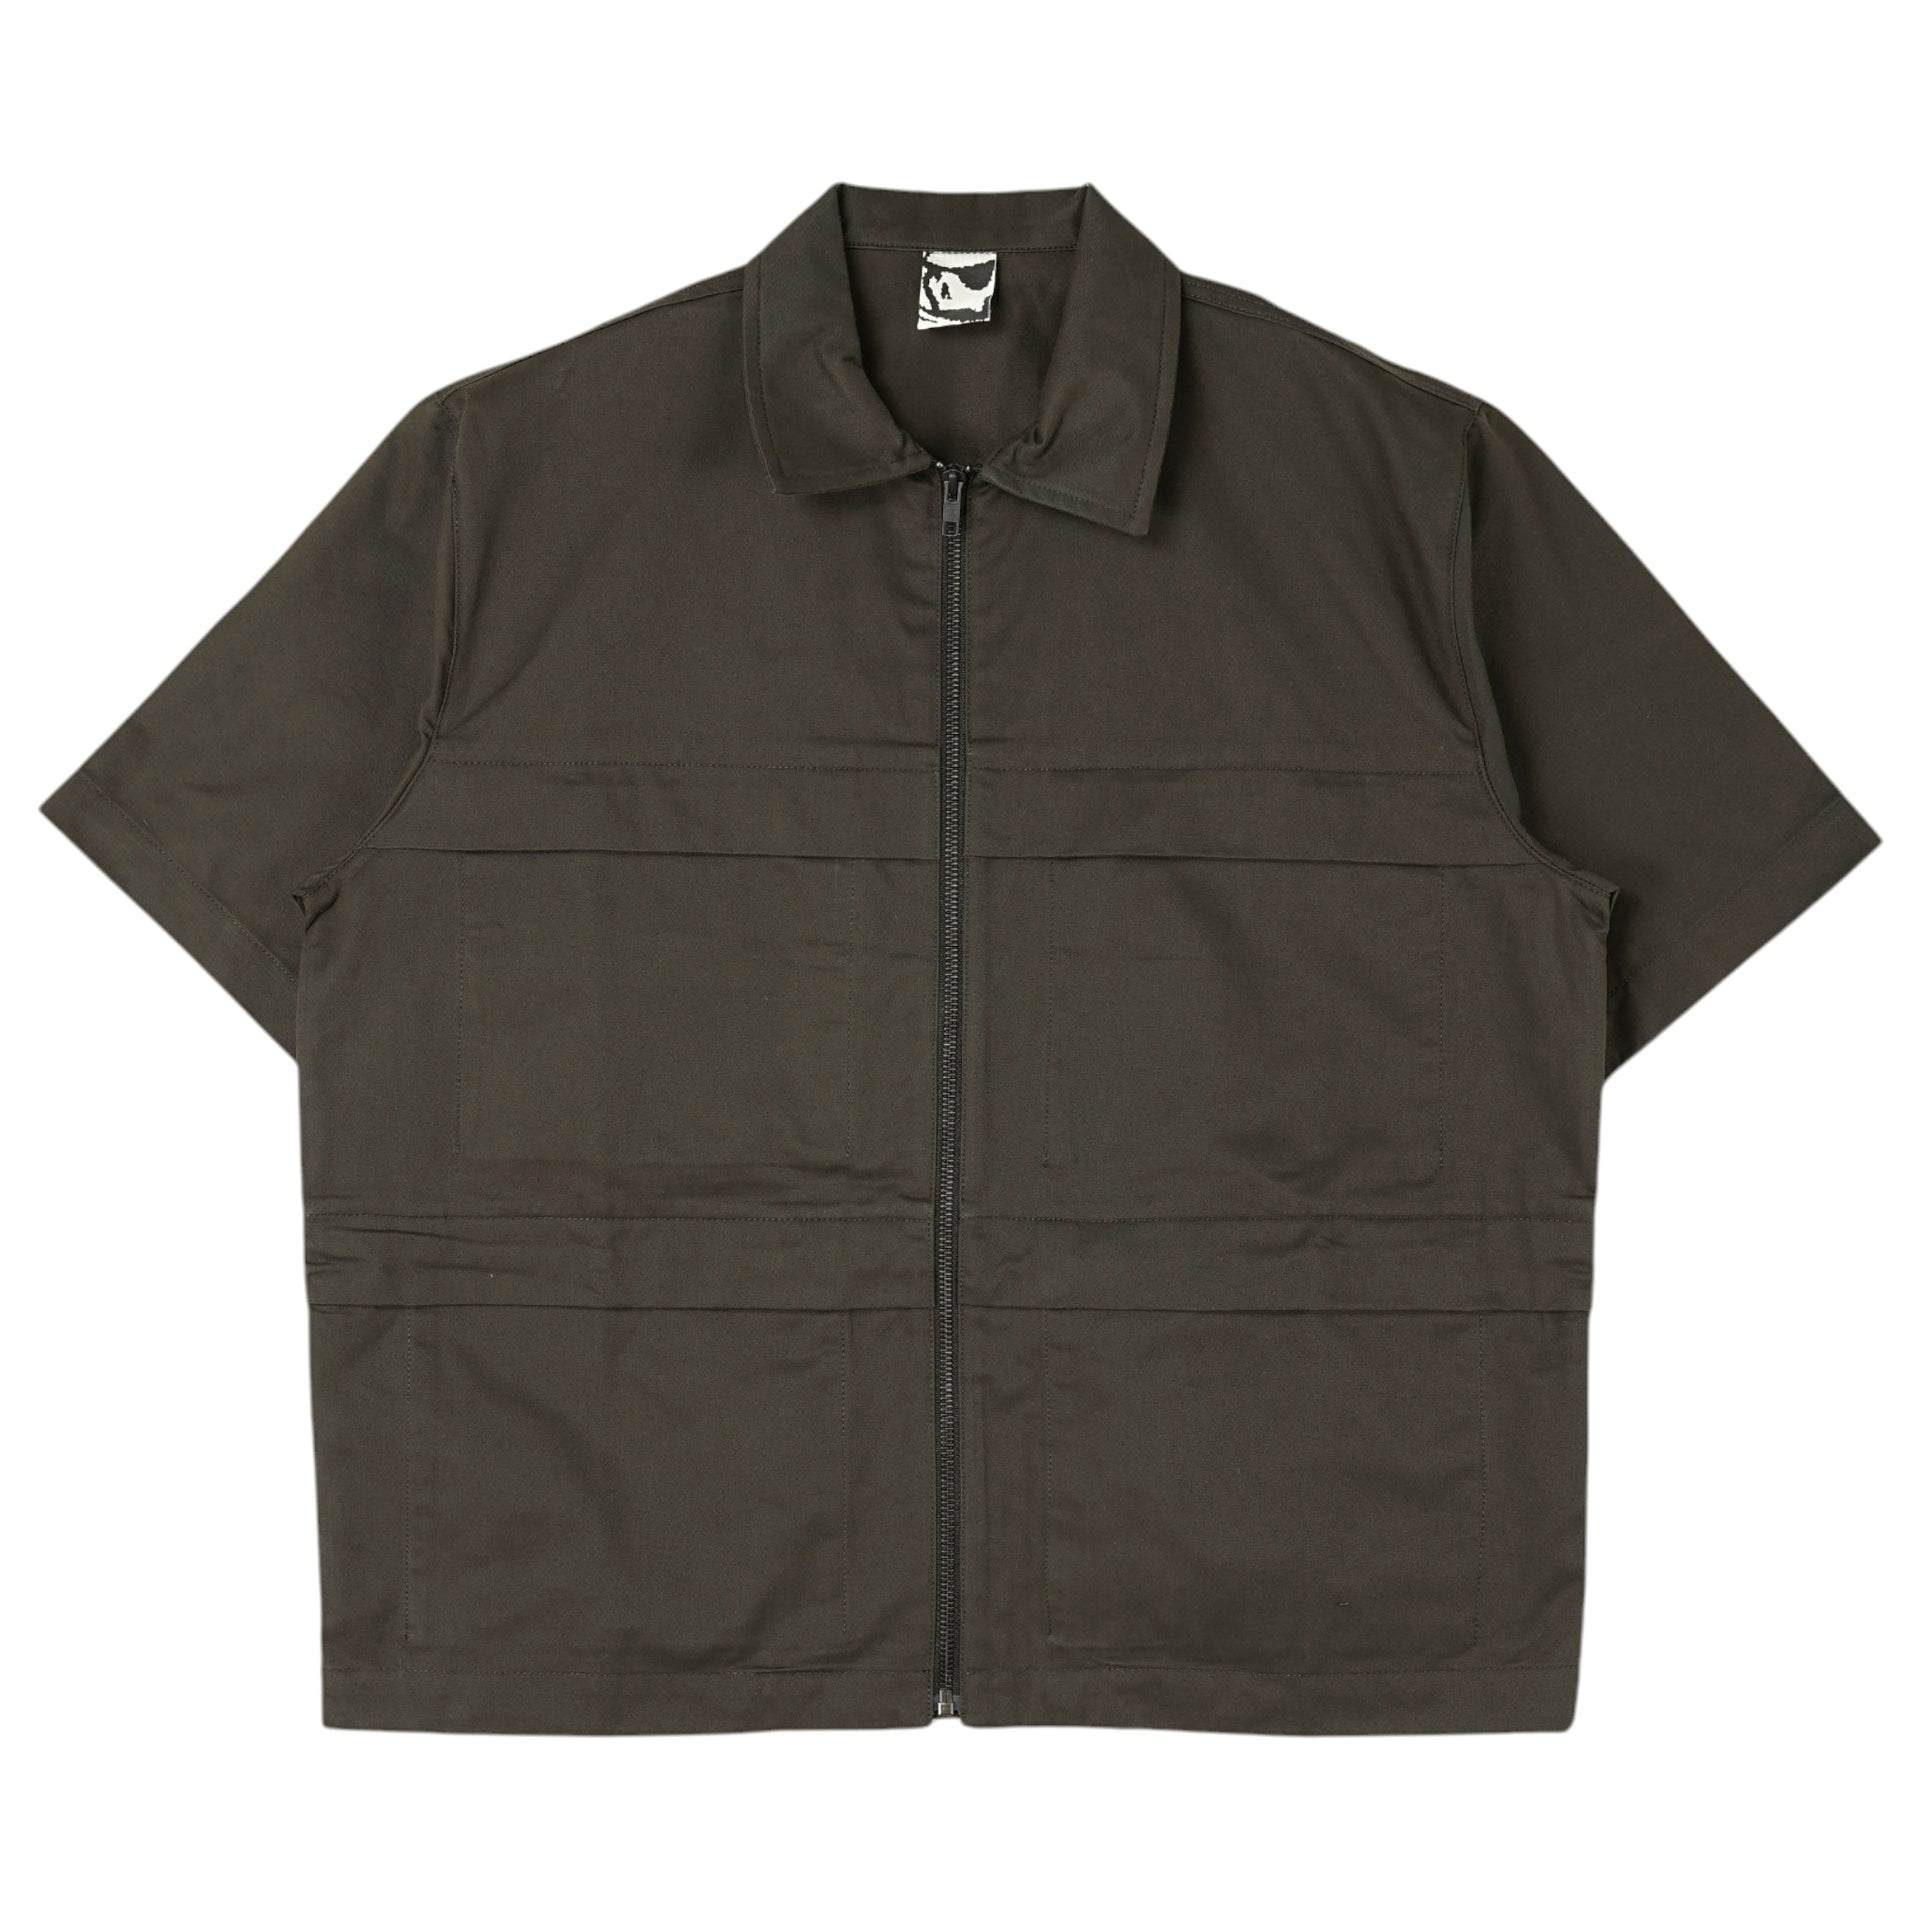 SOLID S/S SHIRT / SOIL BROWN